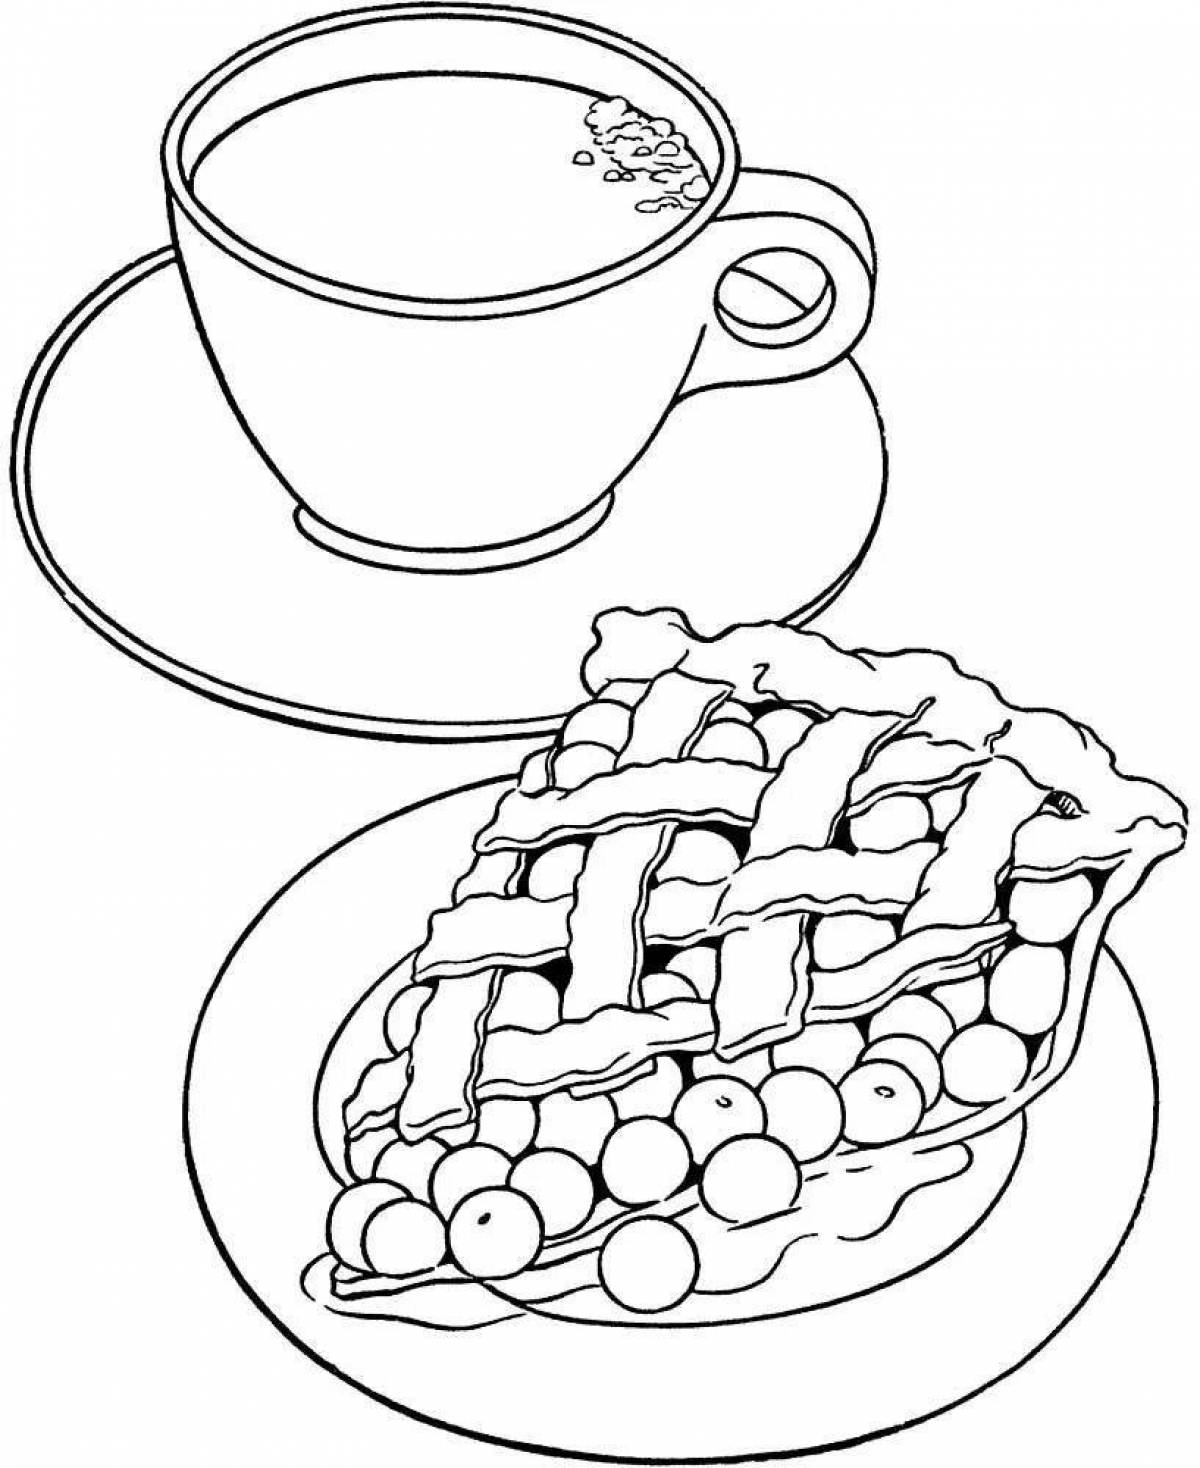 Colorful breakfast coloring book